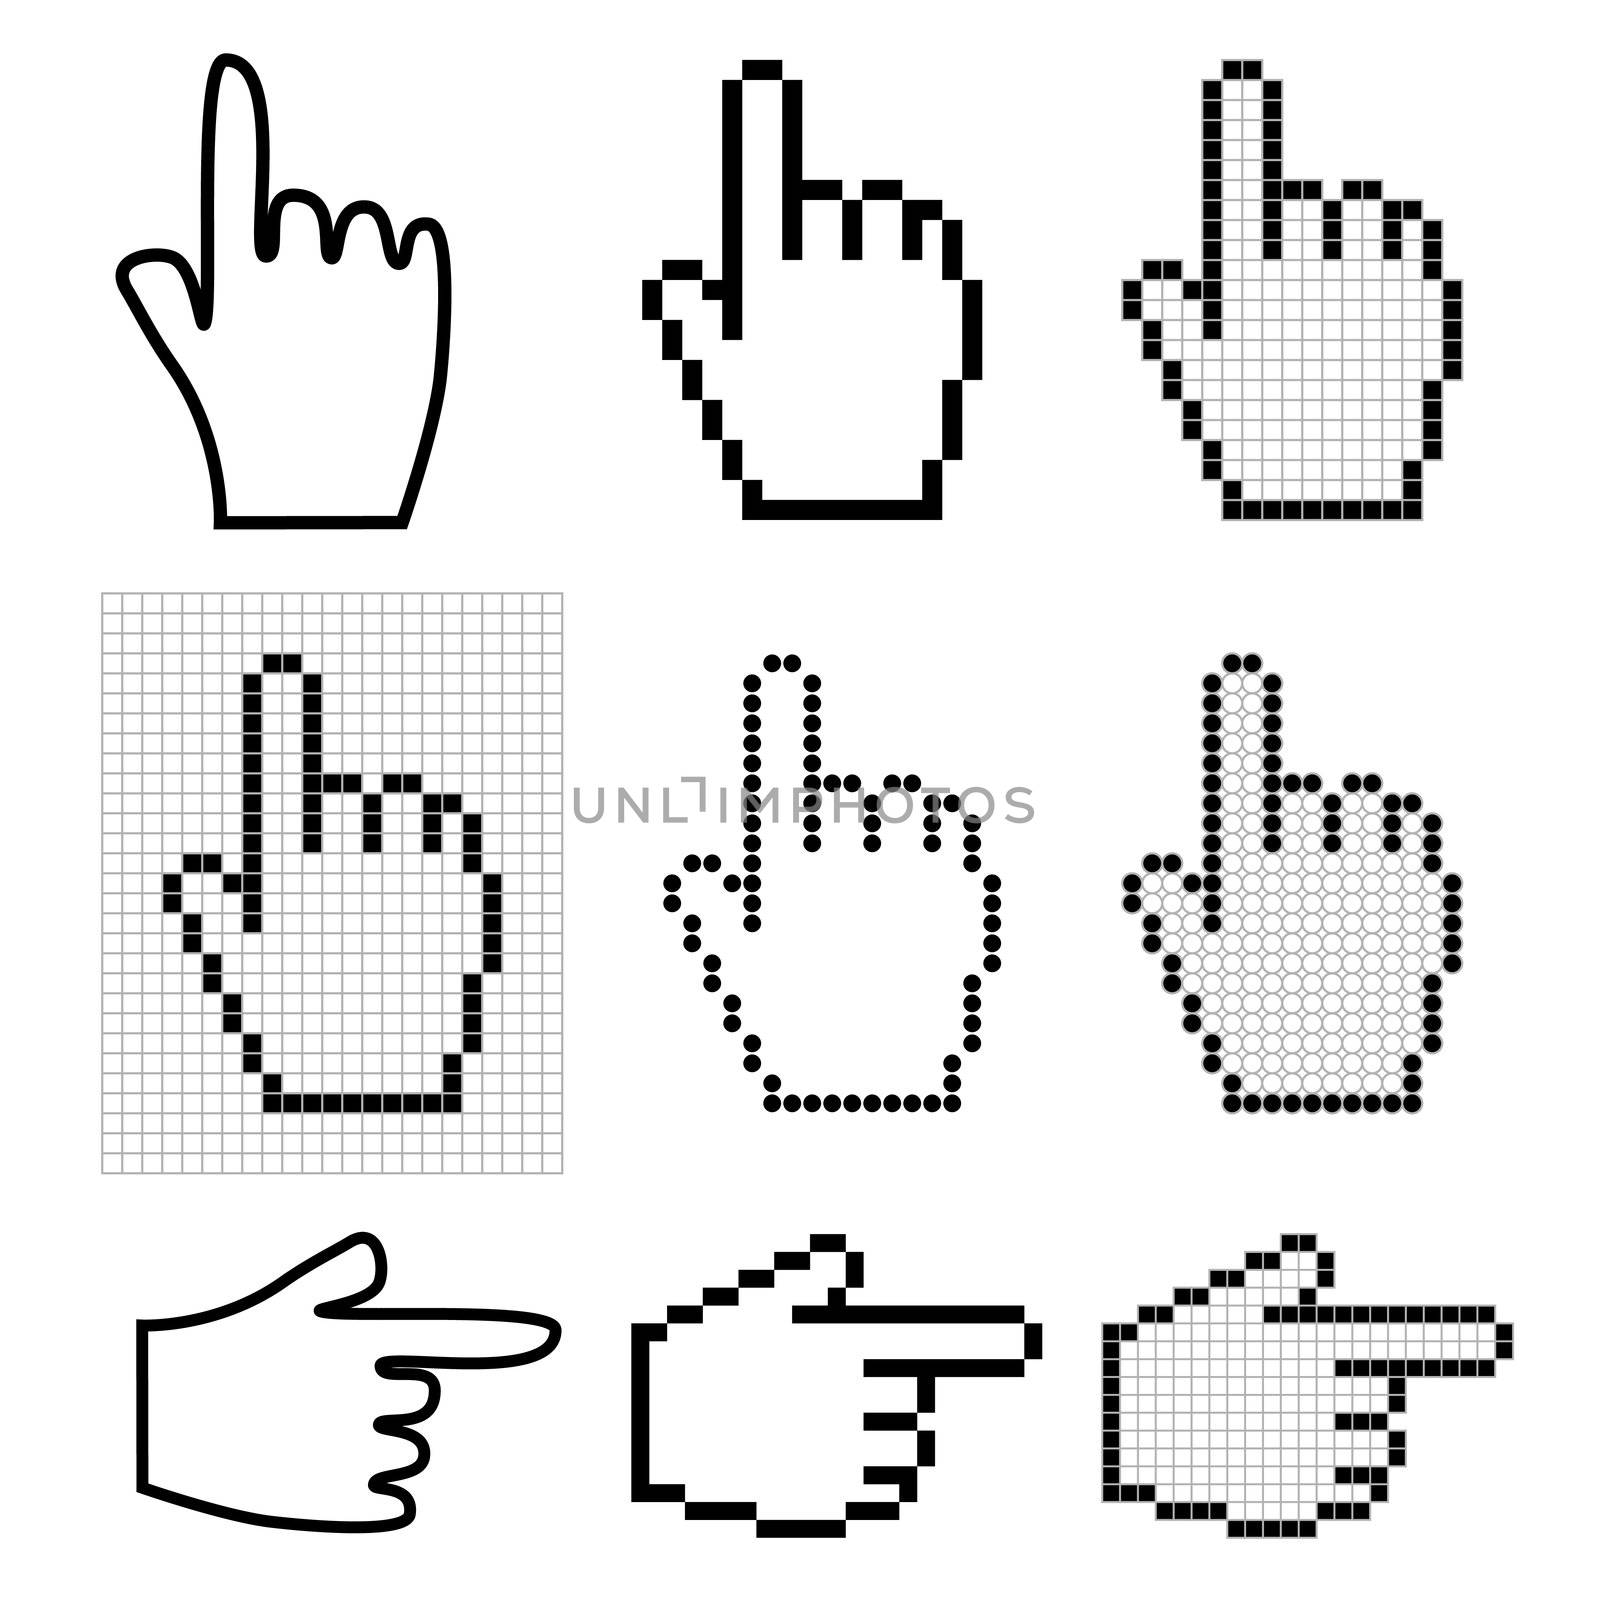 Set of 9 hand mouse cursors by skvoor